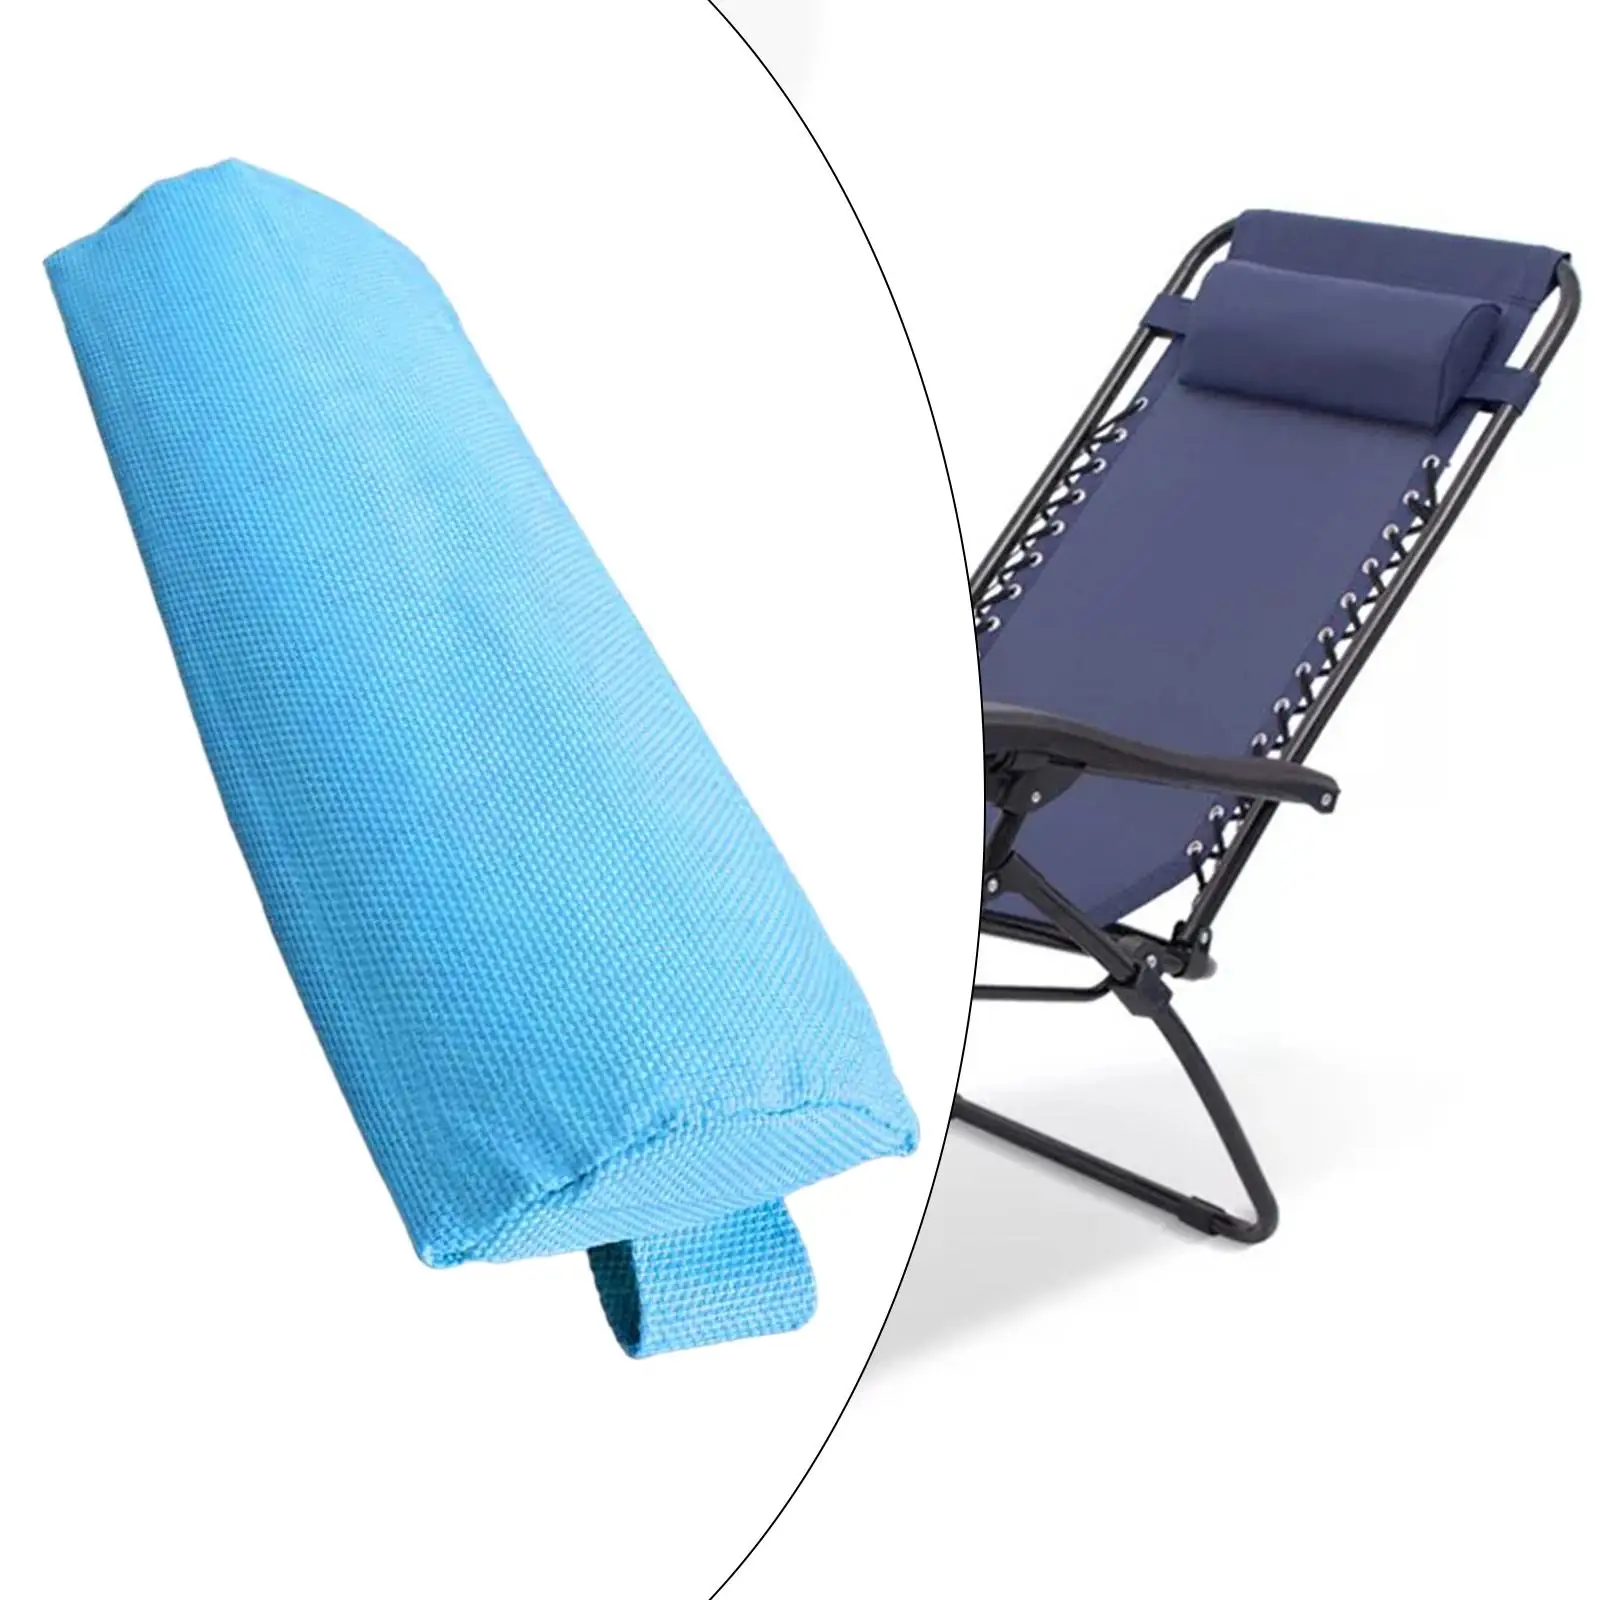 Soft Head Cushion  Adjustable Breathable with Strap Removable Comfortable Pad for Folding Lounger Beach Outdoor Garden Headrest